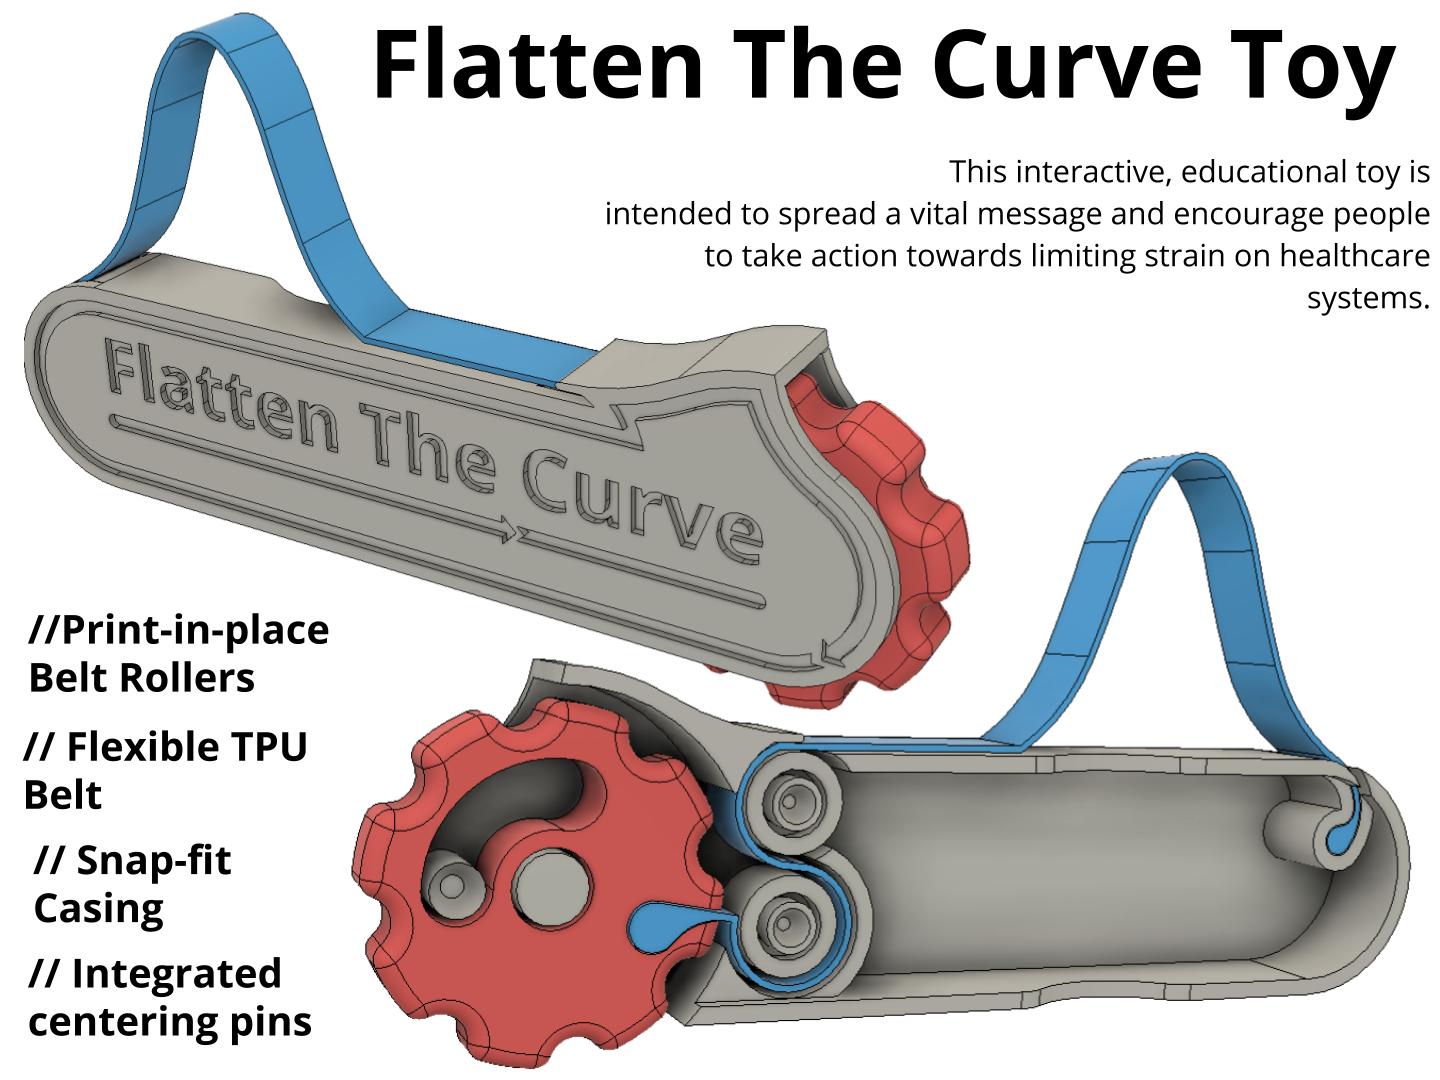 Flatten the Curve Toy